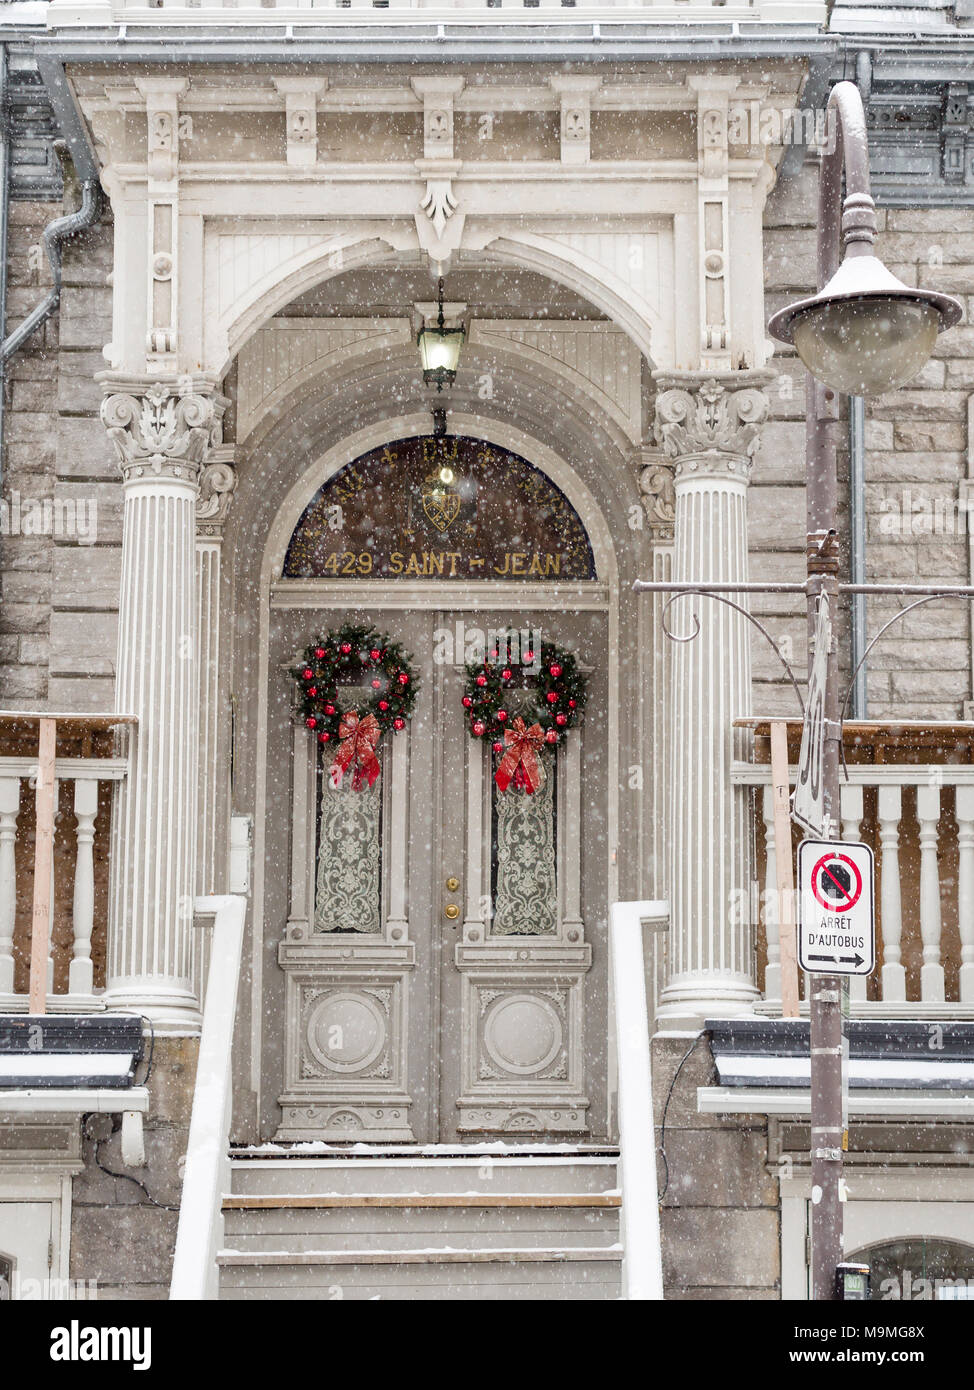 A pair of decorated doors in the snow: The entrance to 429 Saint Jean decorated by two matching wreaths over the double doors. Fancy columns and a porch protect them from the falling snow. Stock Photo